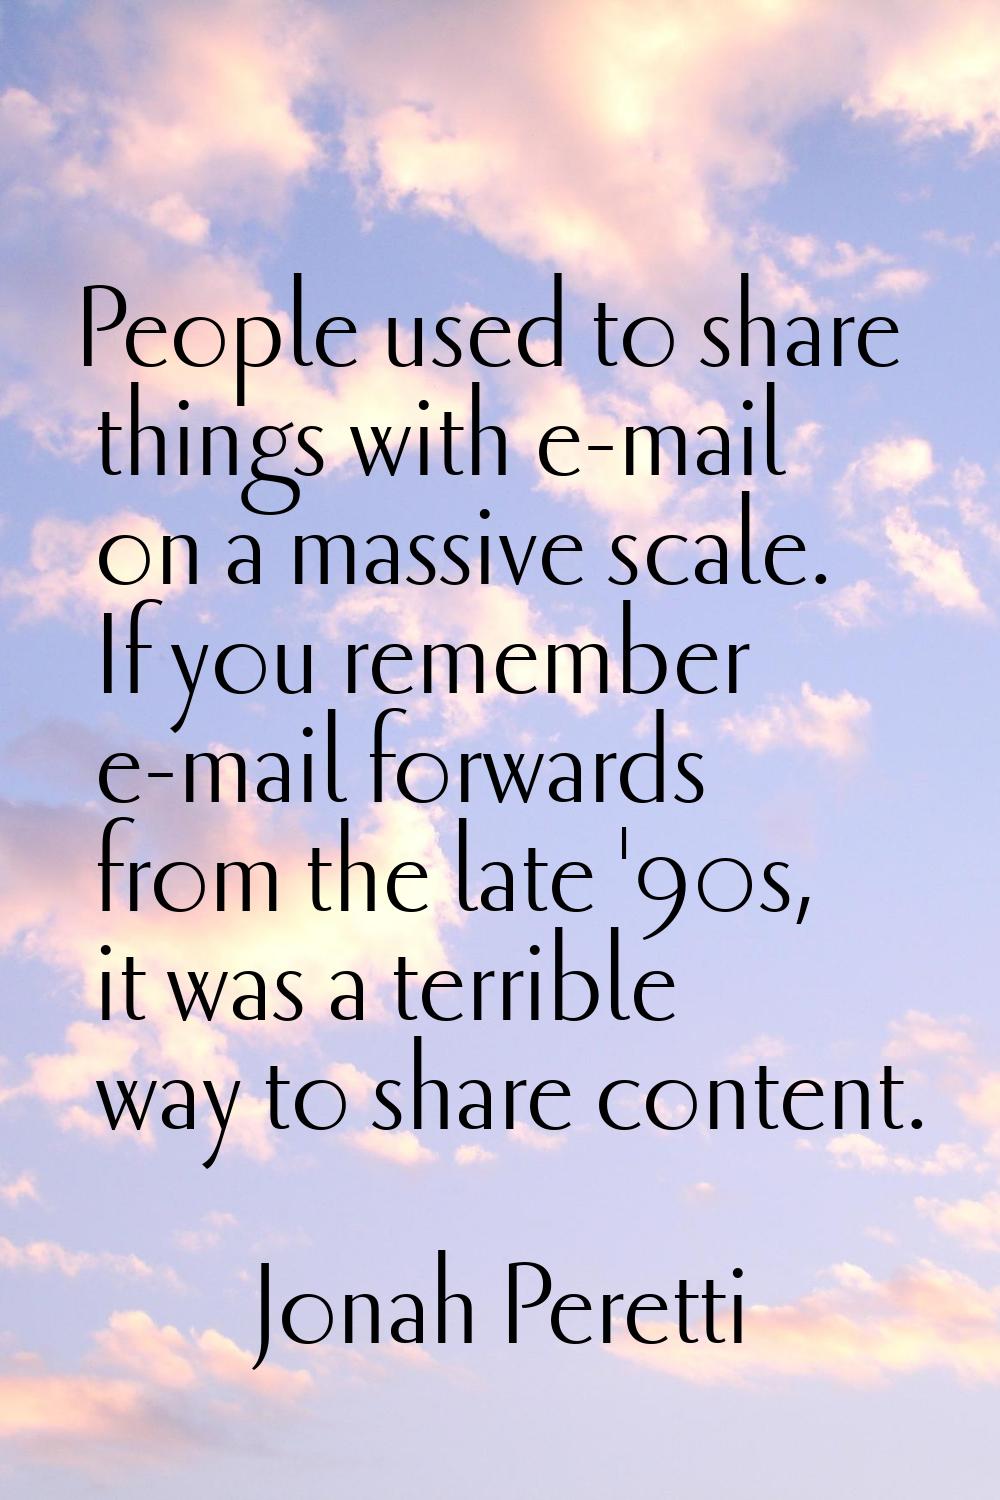 People used to share things with e-mail on a massive scale. If you remember e-mail forwards from th